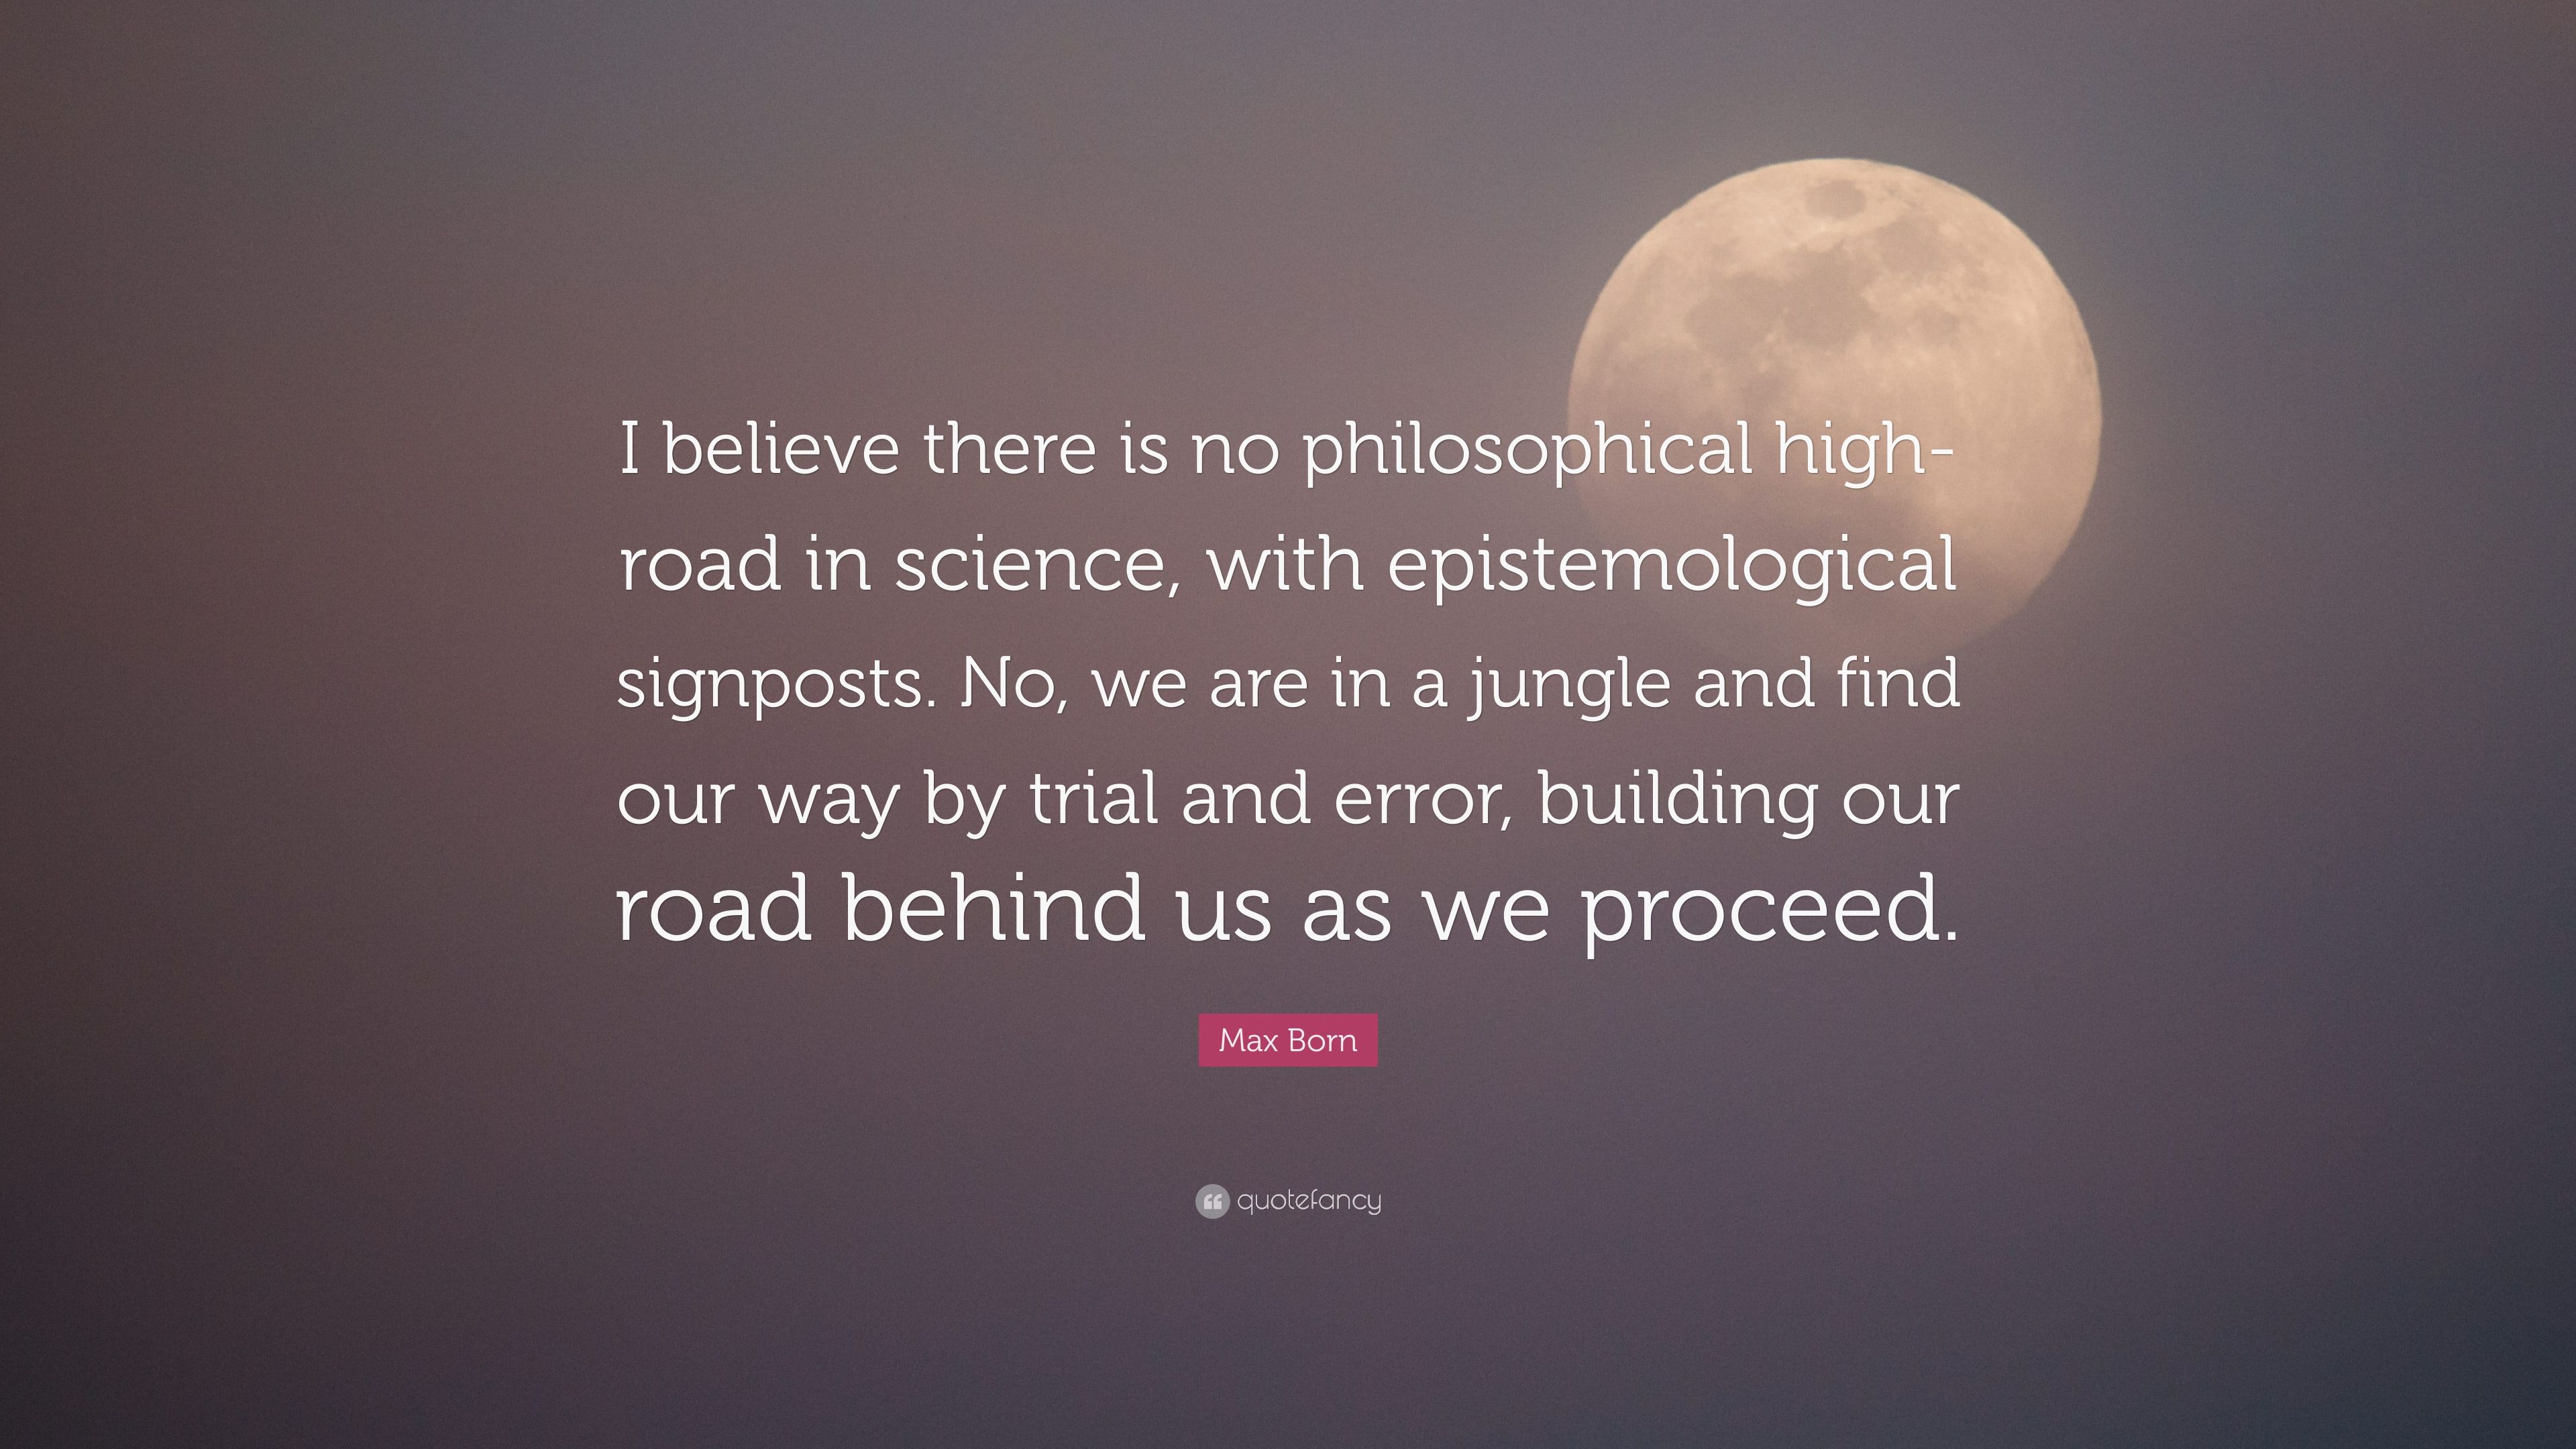 Max born quote âi believe there is no philosophical high